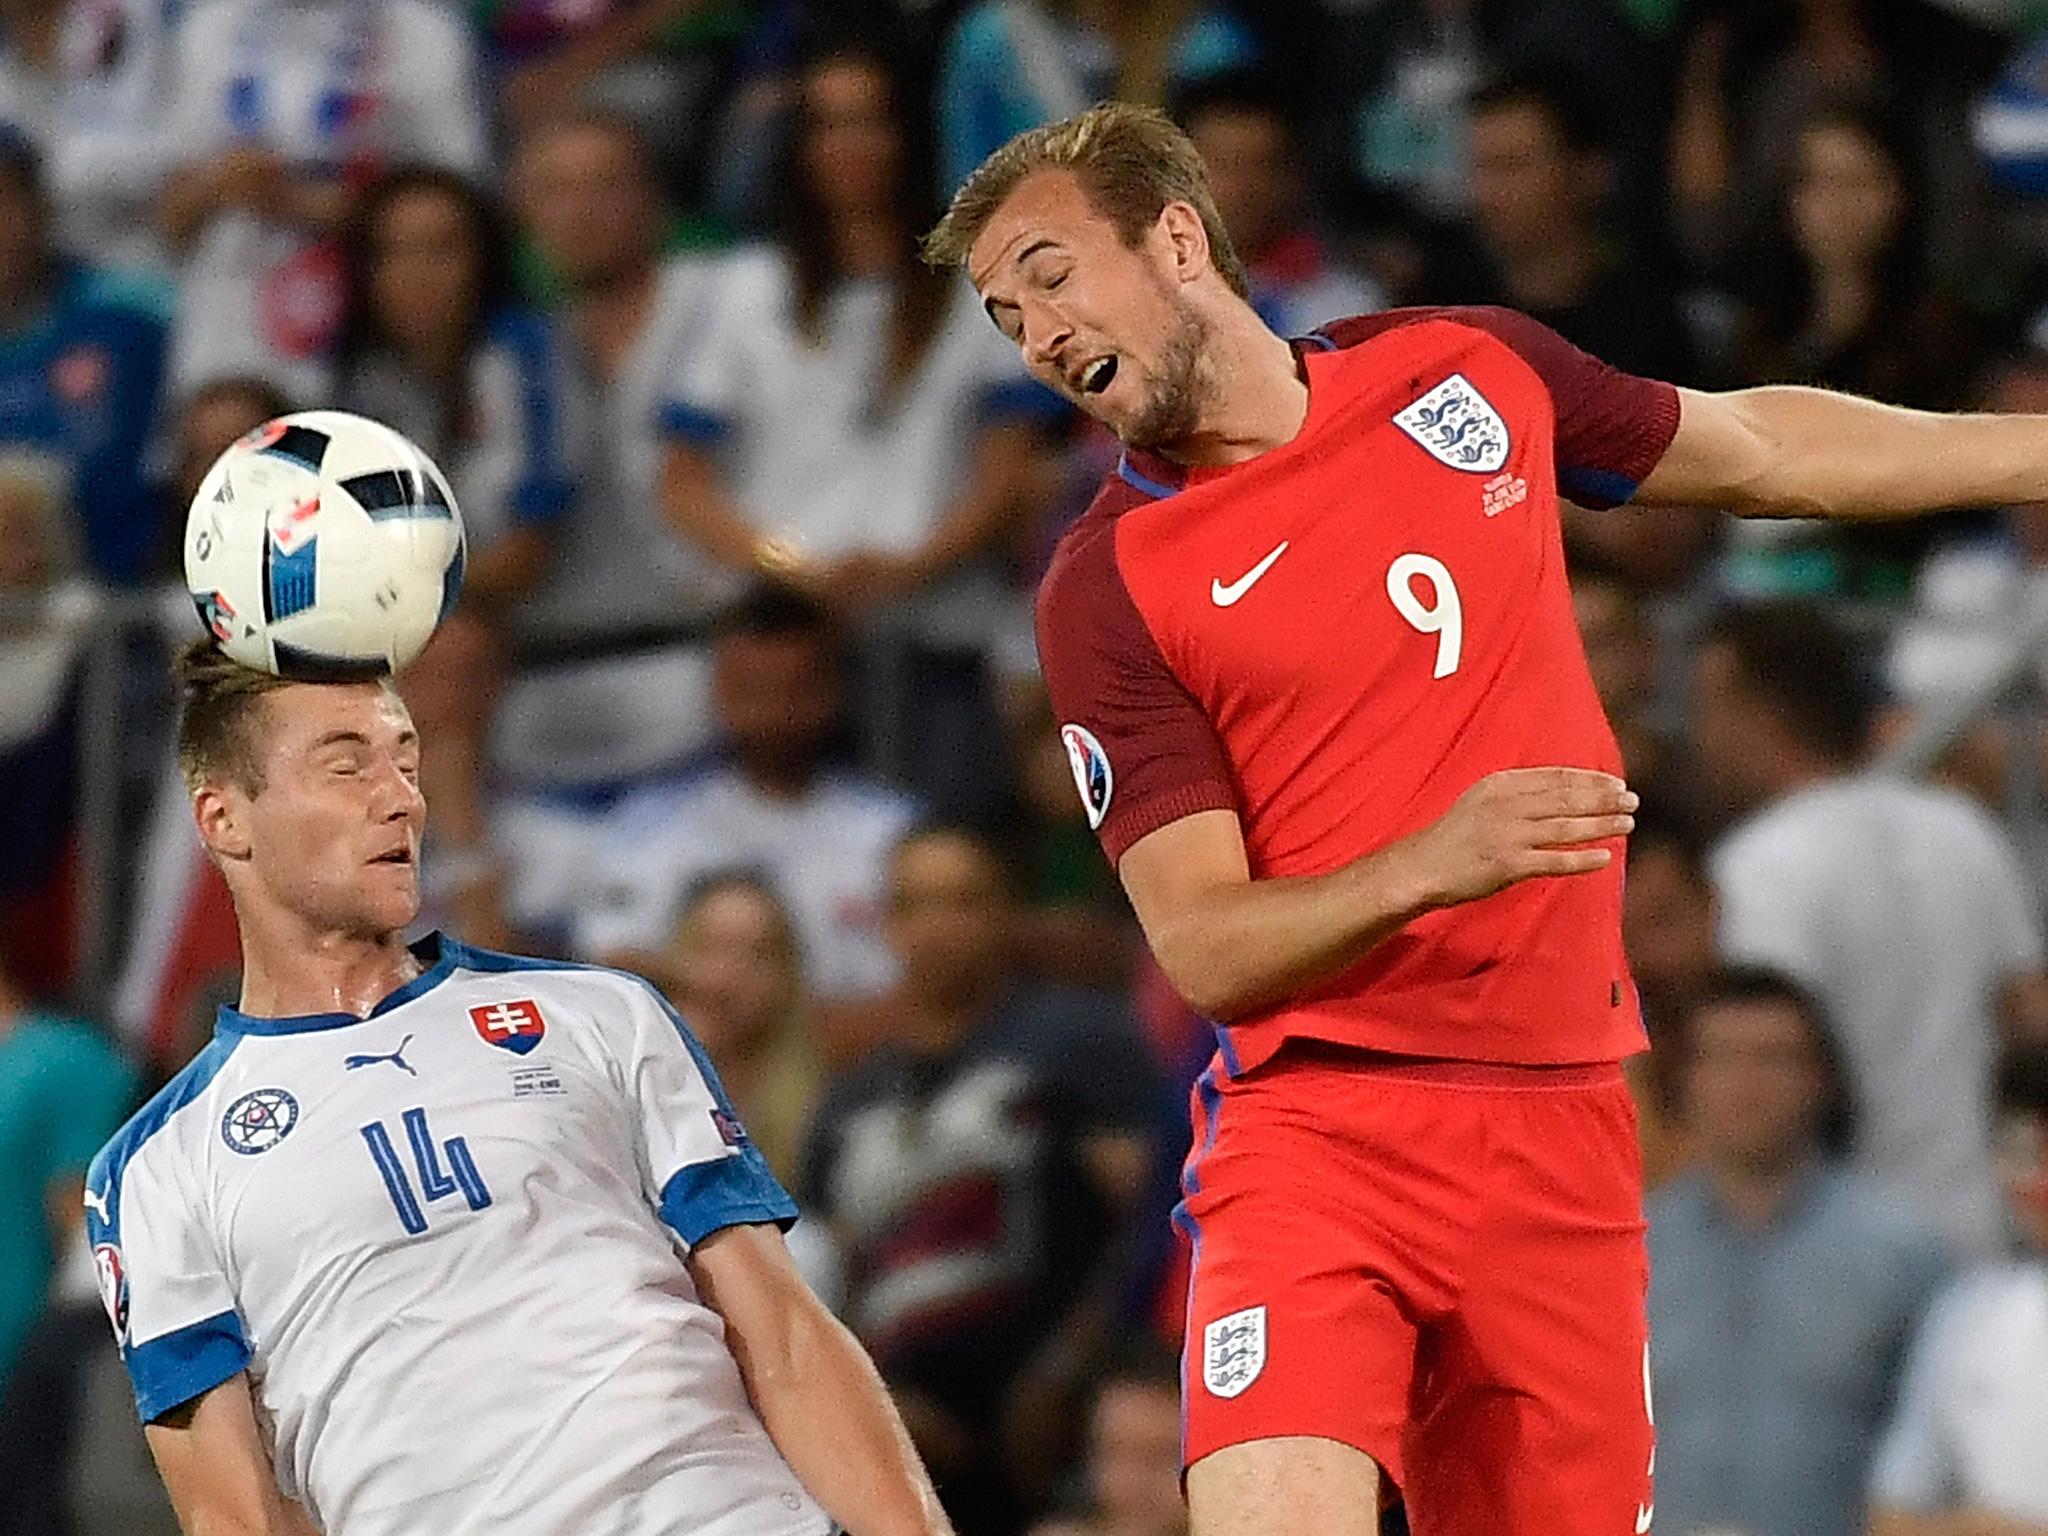 Kane struggled to make an impact as a second-half substitute against Slovakia